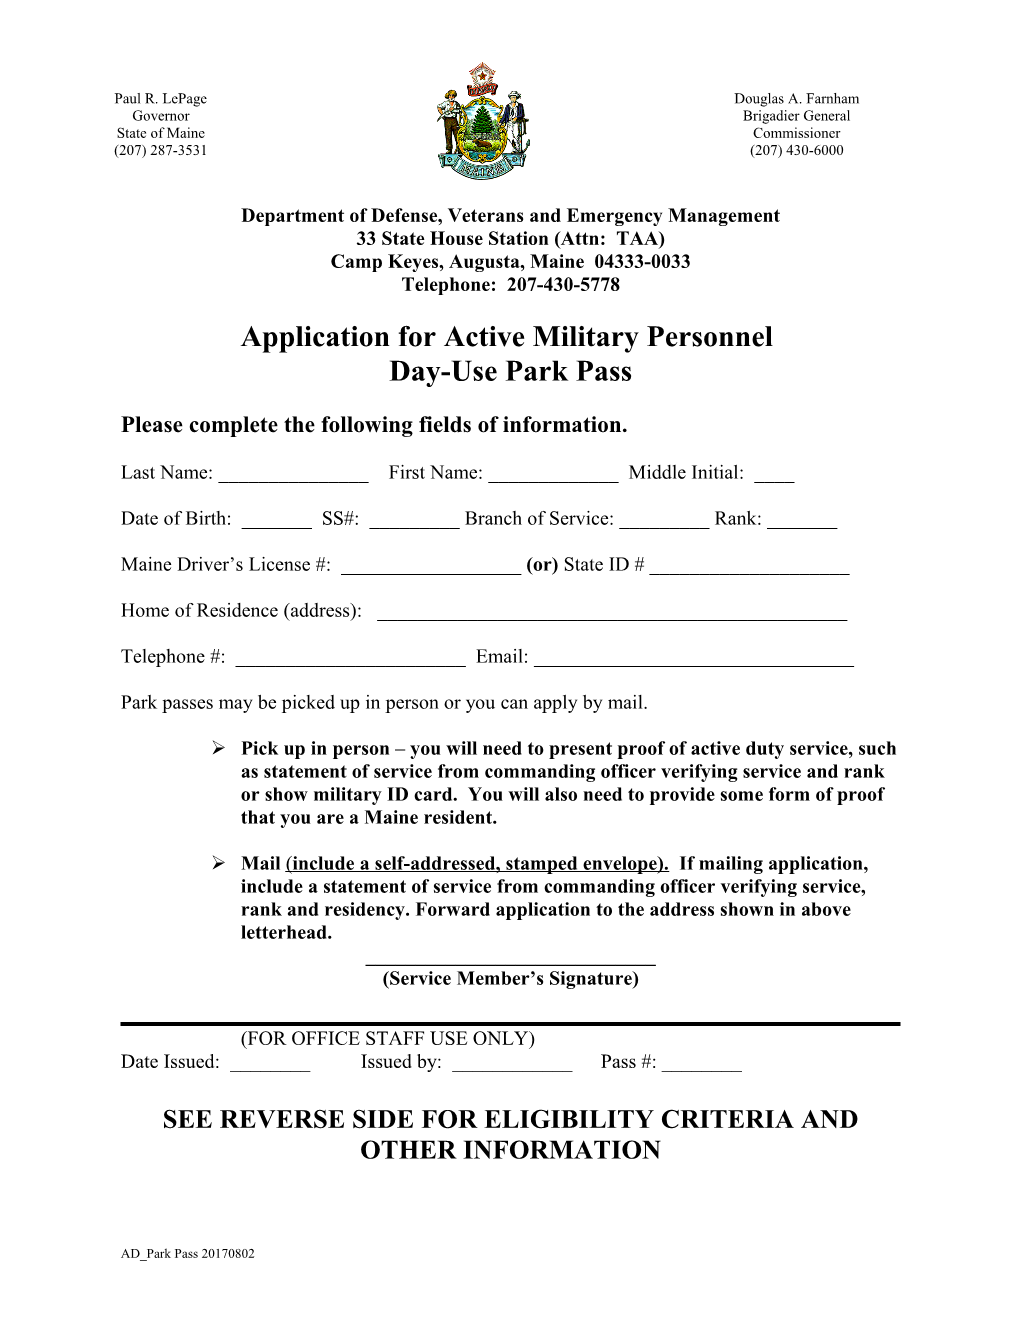 Application for Active Military Personnel